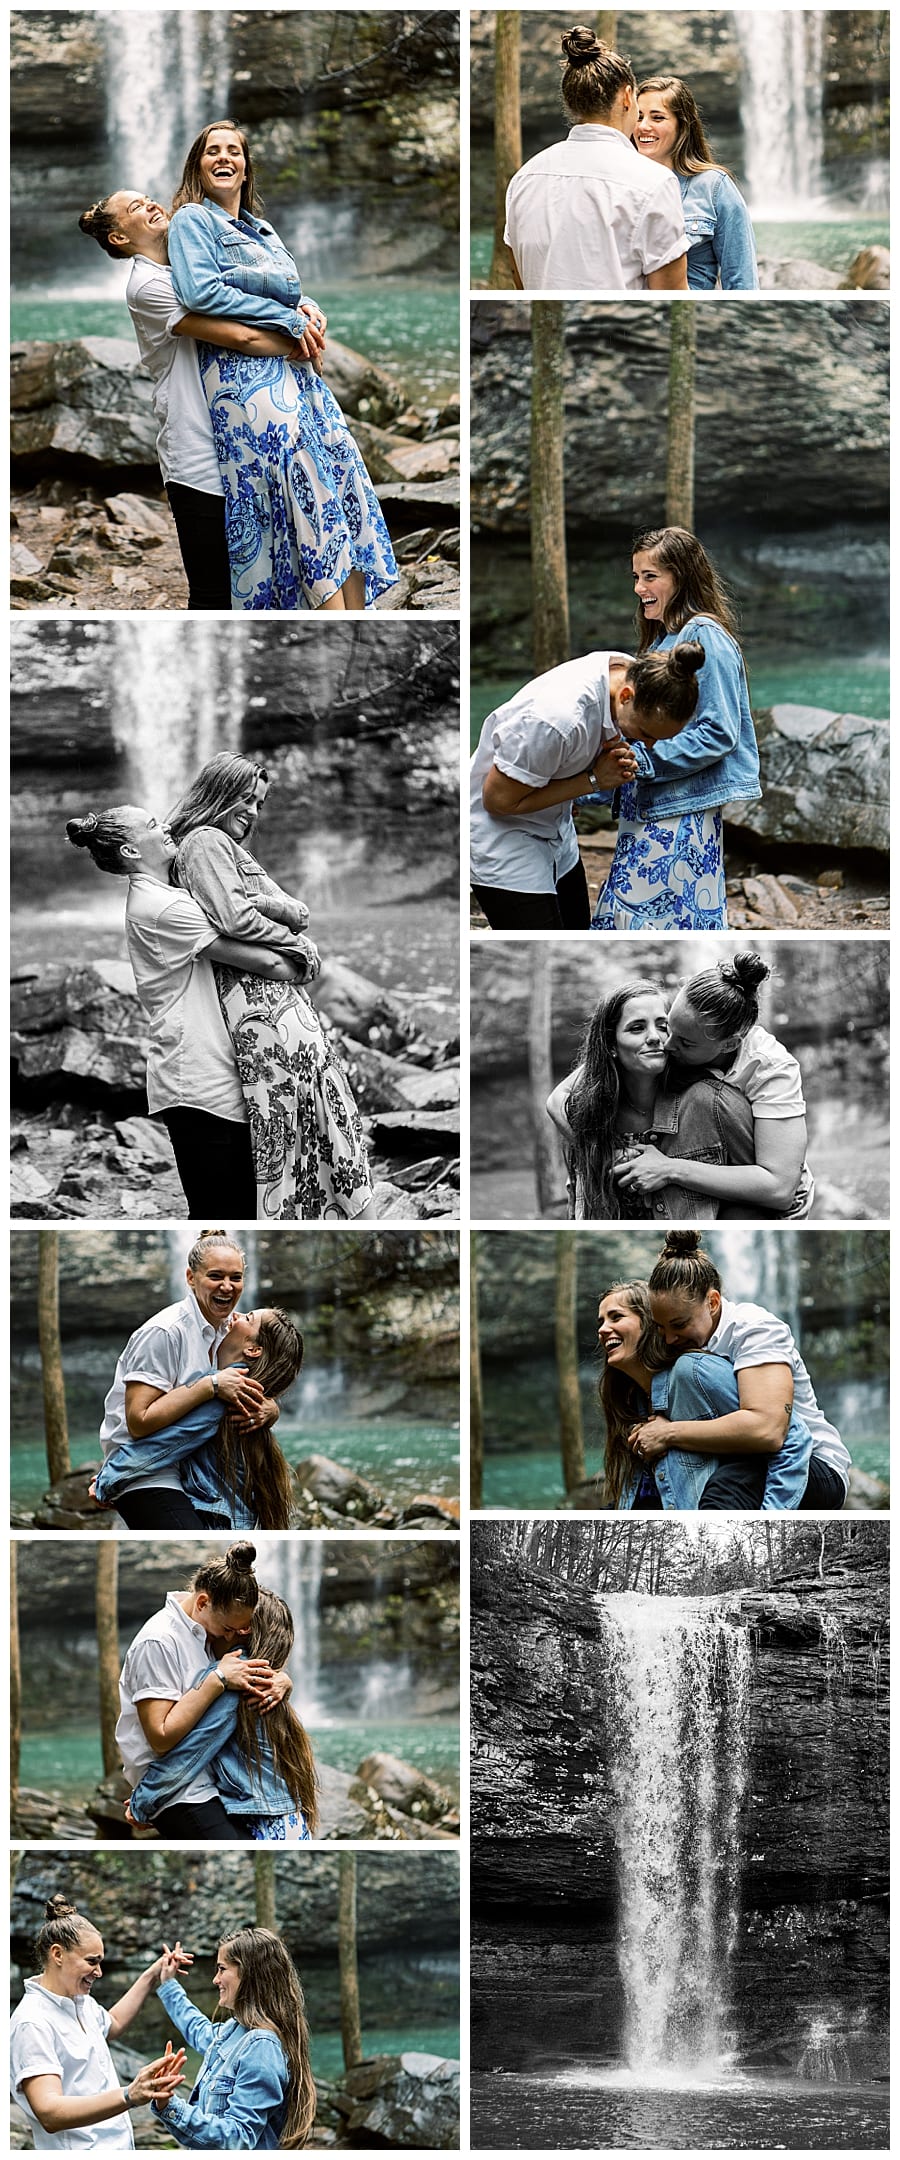 Laughter and Love at Cloudland Canyon State Park in Chattanooga by Adventurous Couple photographer, J.J. Au'Clair. Celebrating love and freedom for all couples!